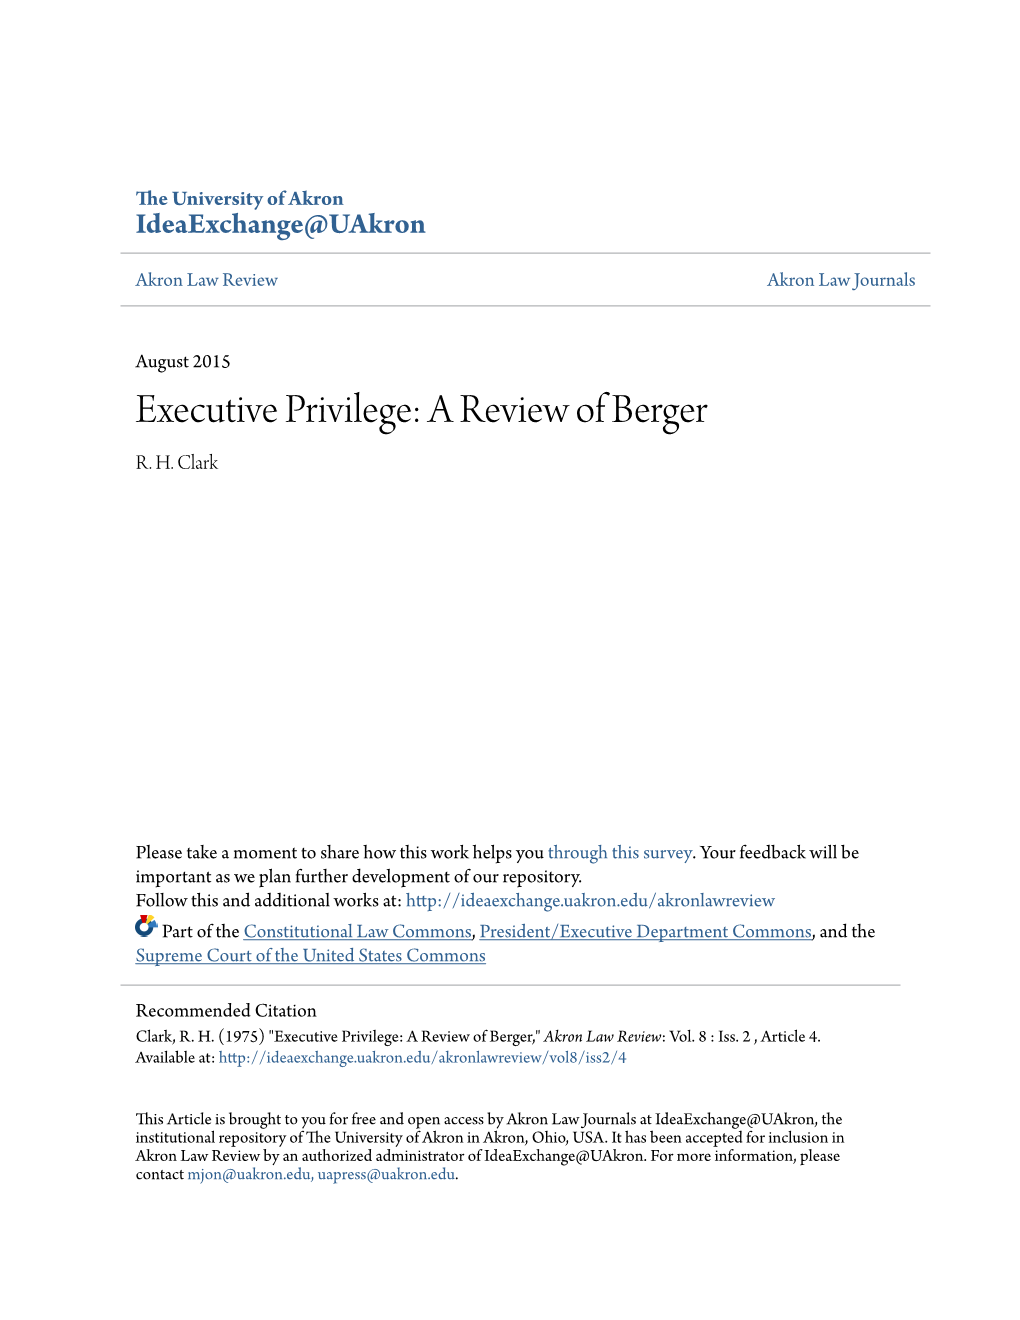 Executive Privilege: a Review of Berger R